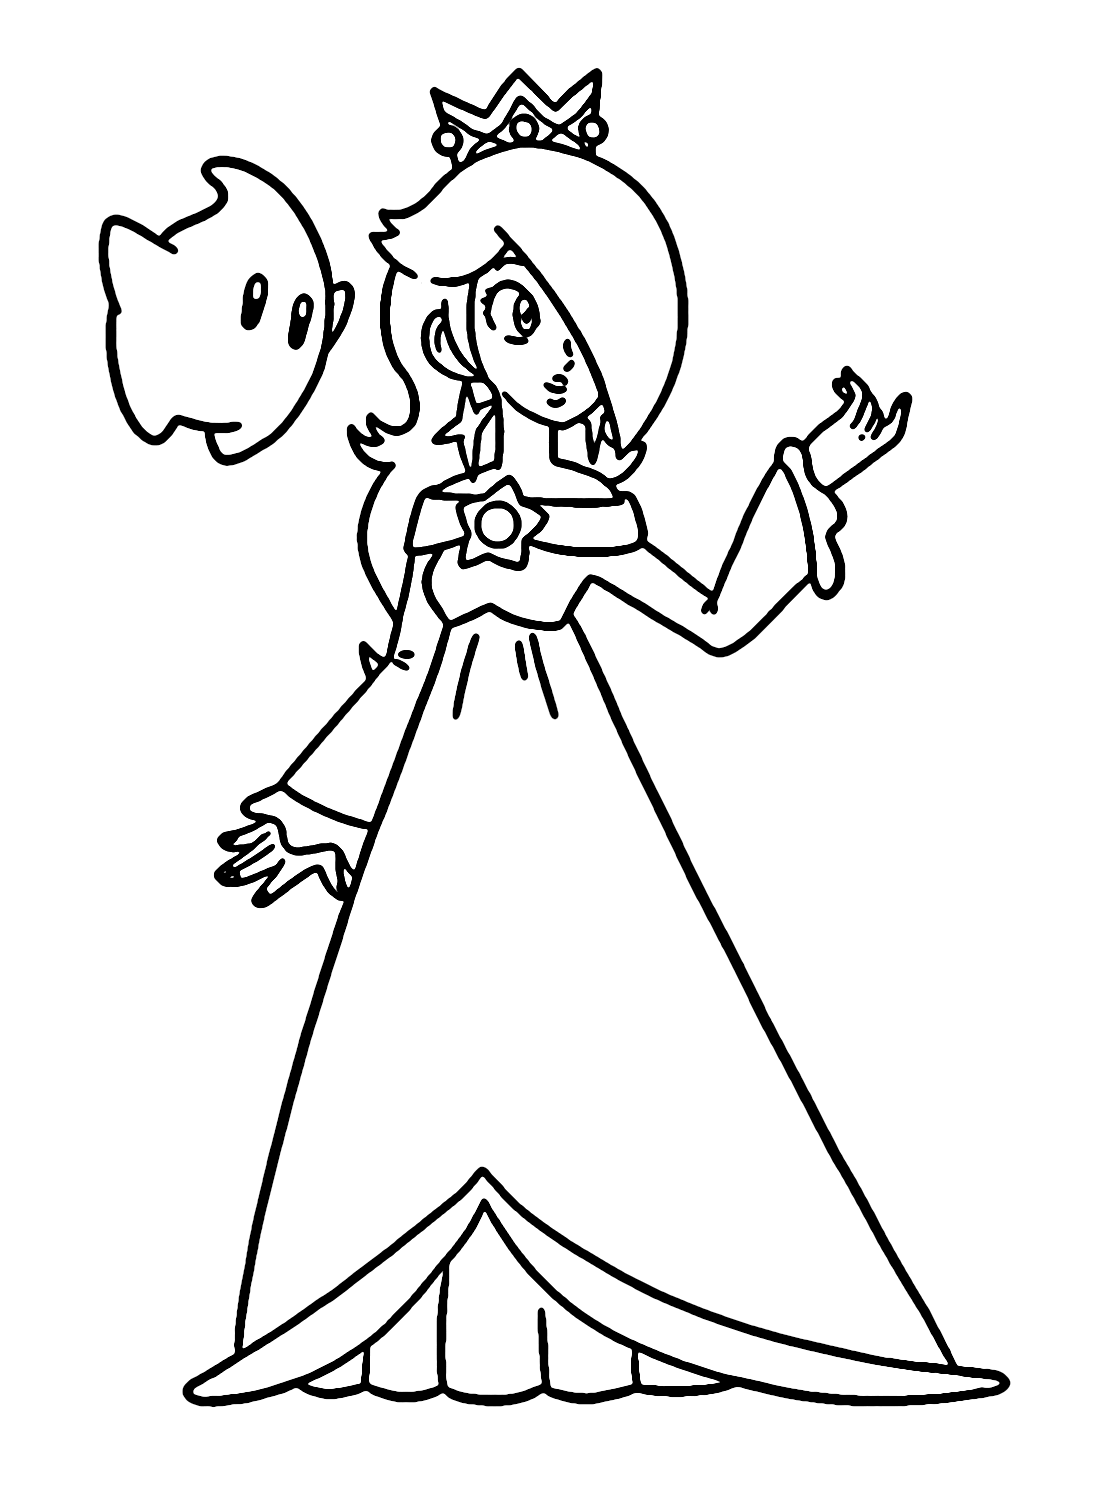 Rosalina from Super Mario Coloring Page - Free Printable Coloring Pages